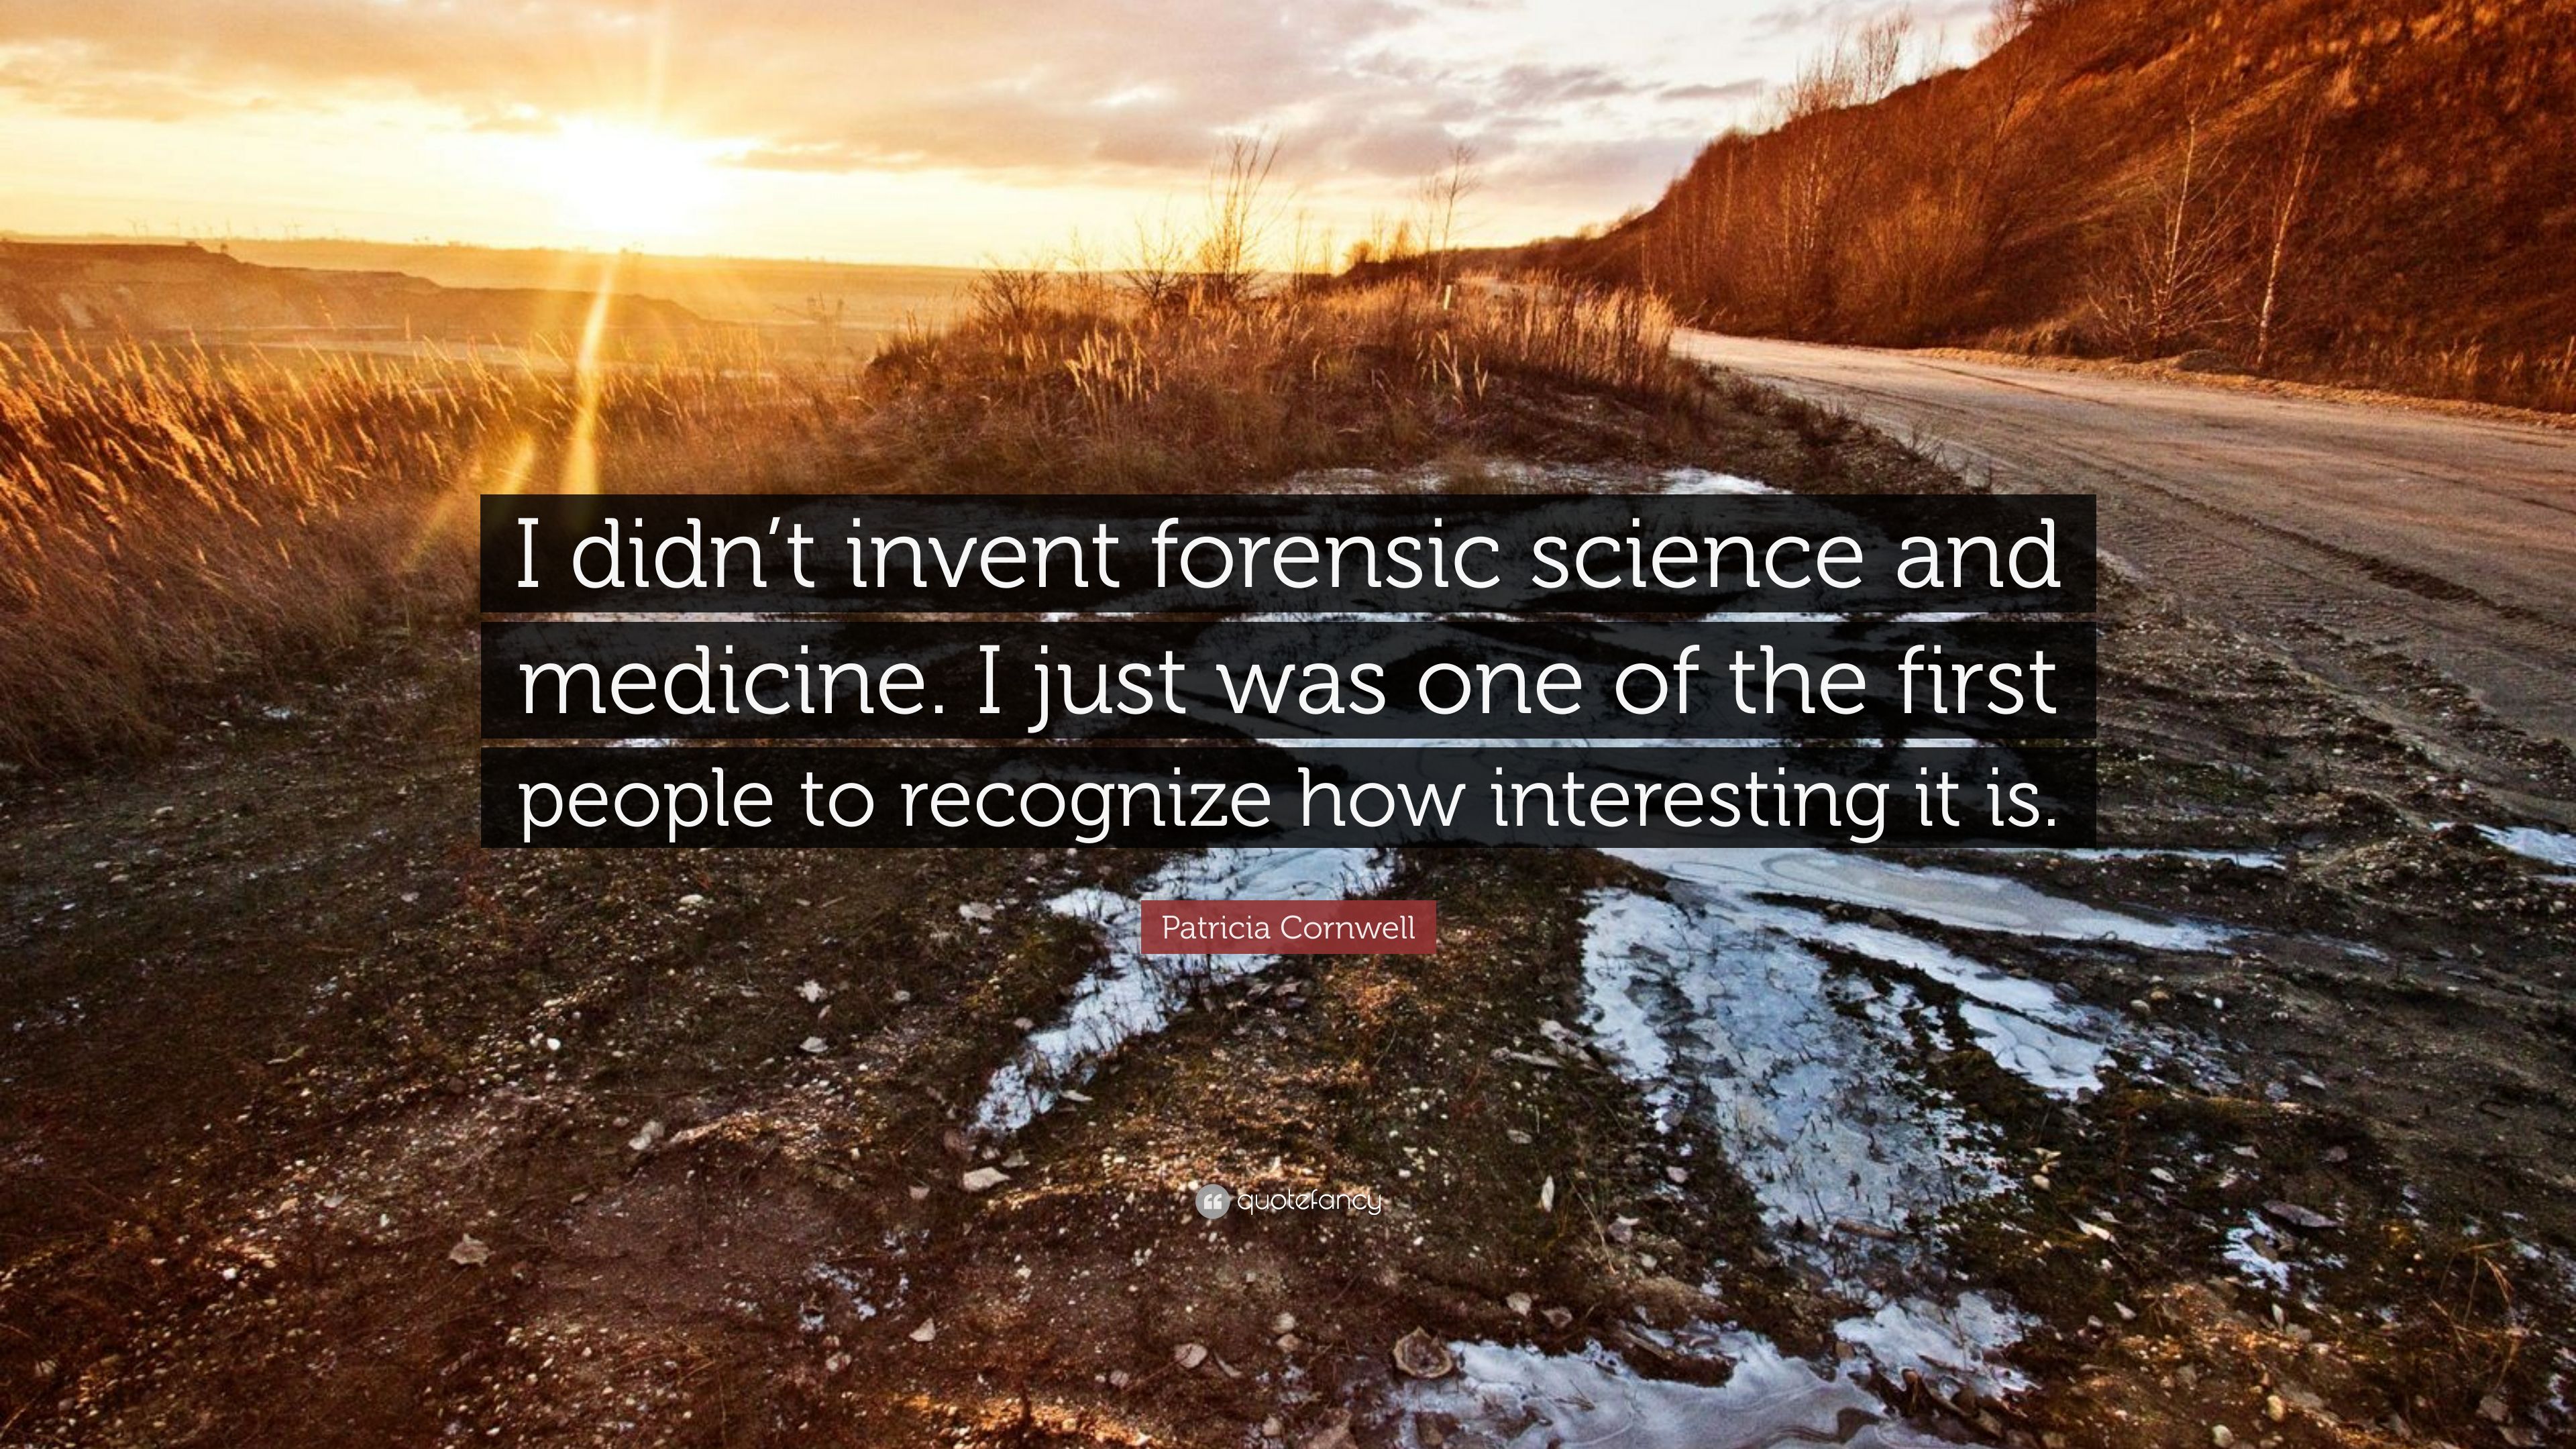 Patricia Cornwell Quote: “I didn't invent forensic science and medicine. I just was one of the first people to recognize how interesting it is.” (7 wallpaper)